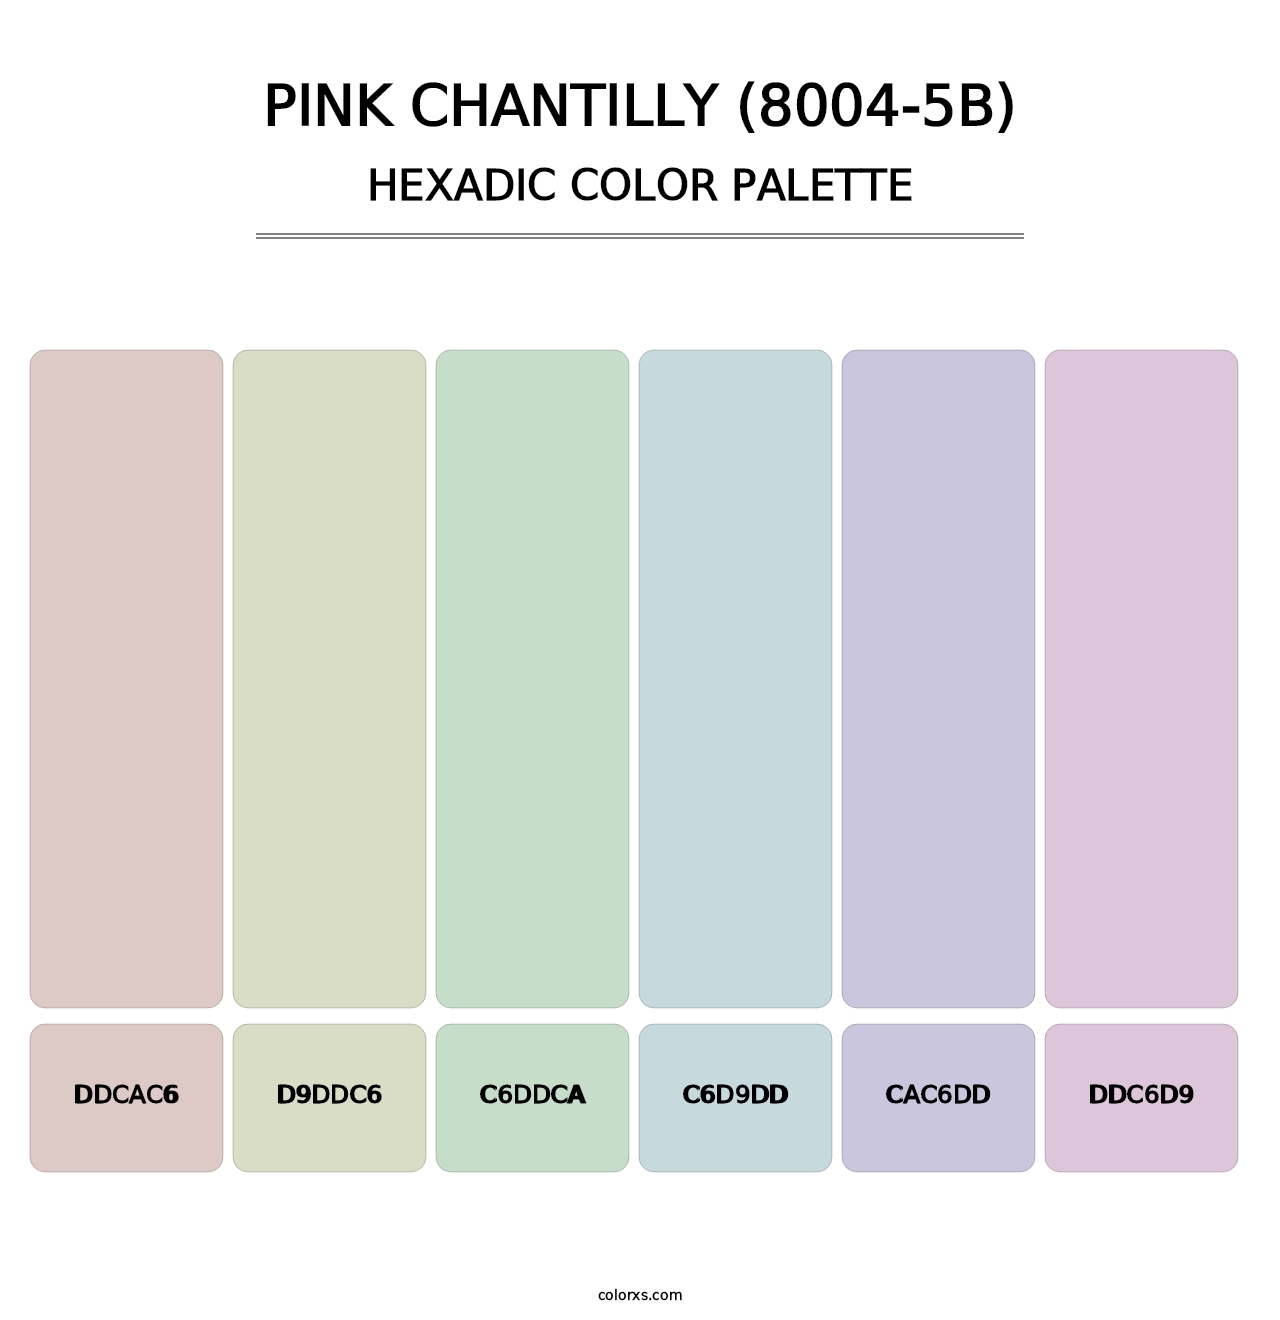 Pink Chantilly (8004-5B) - Hexadic Color Palette